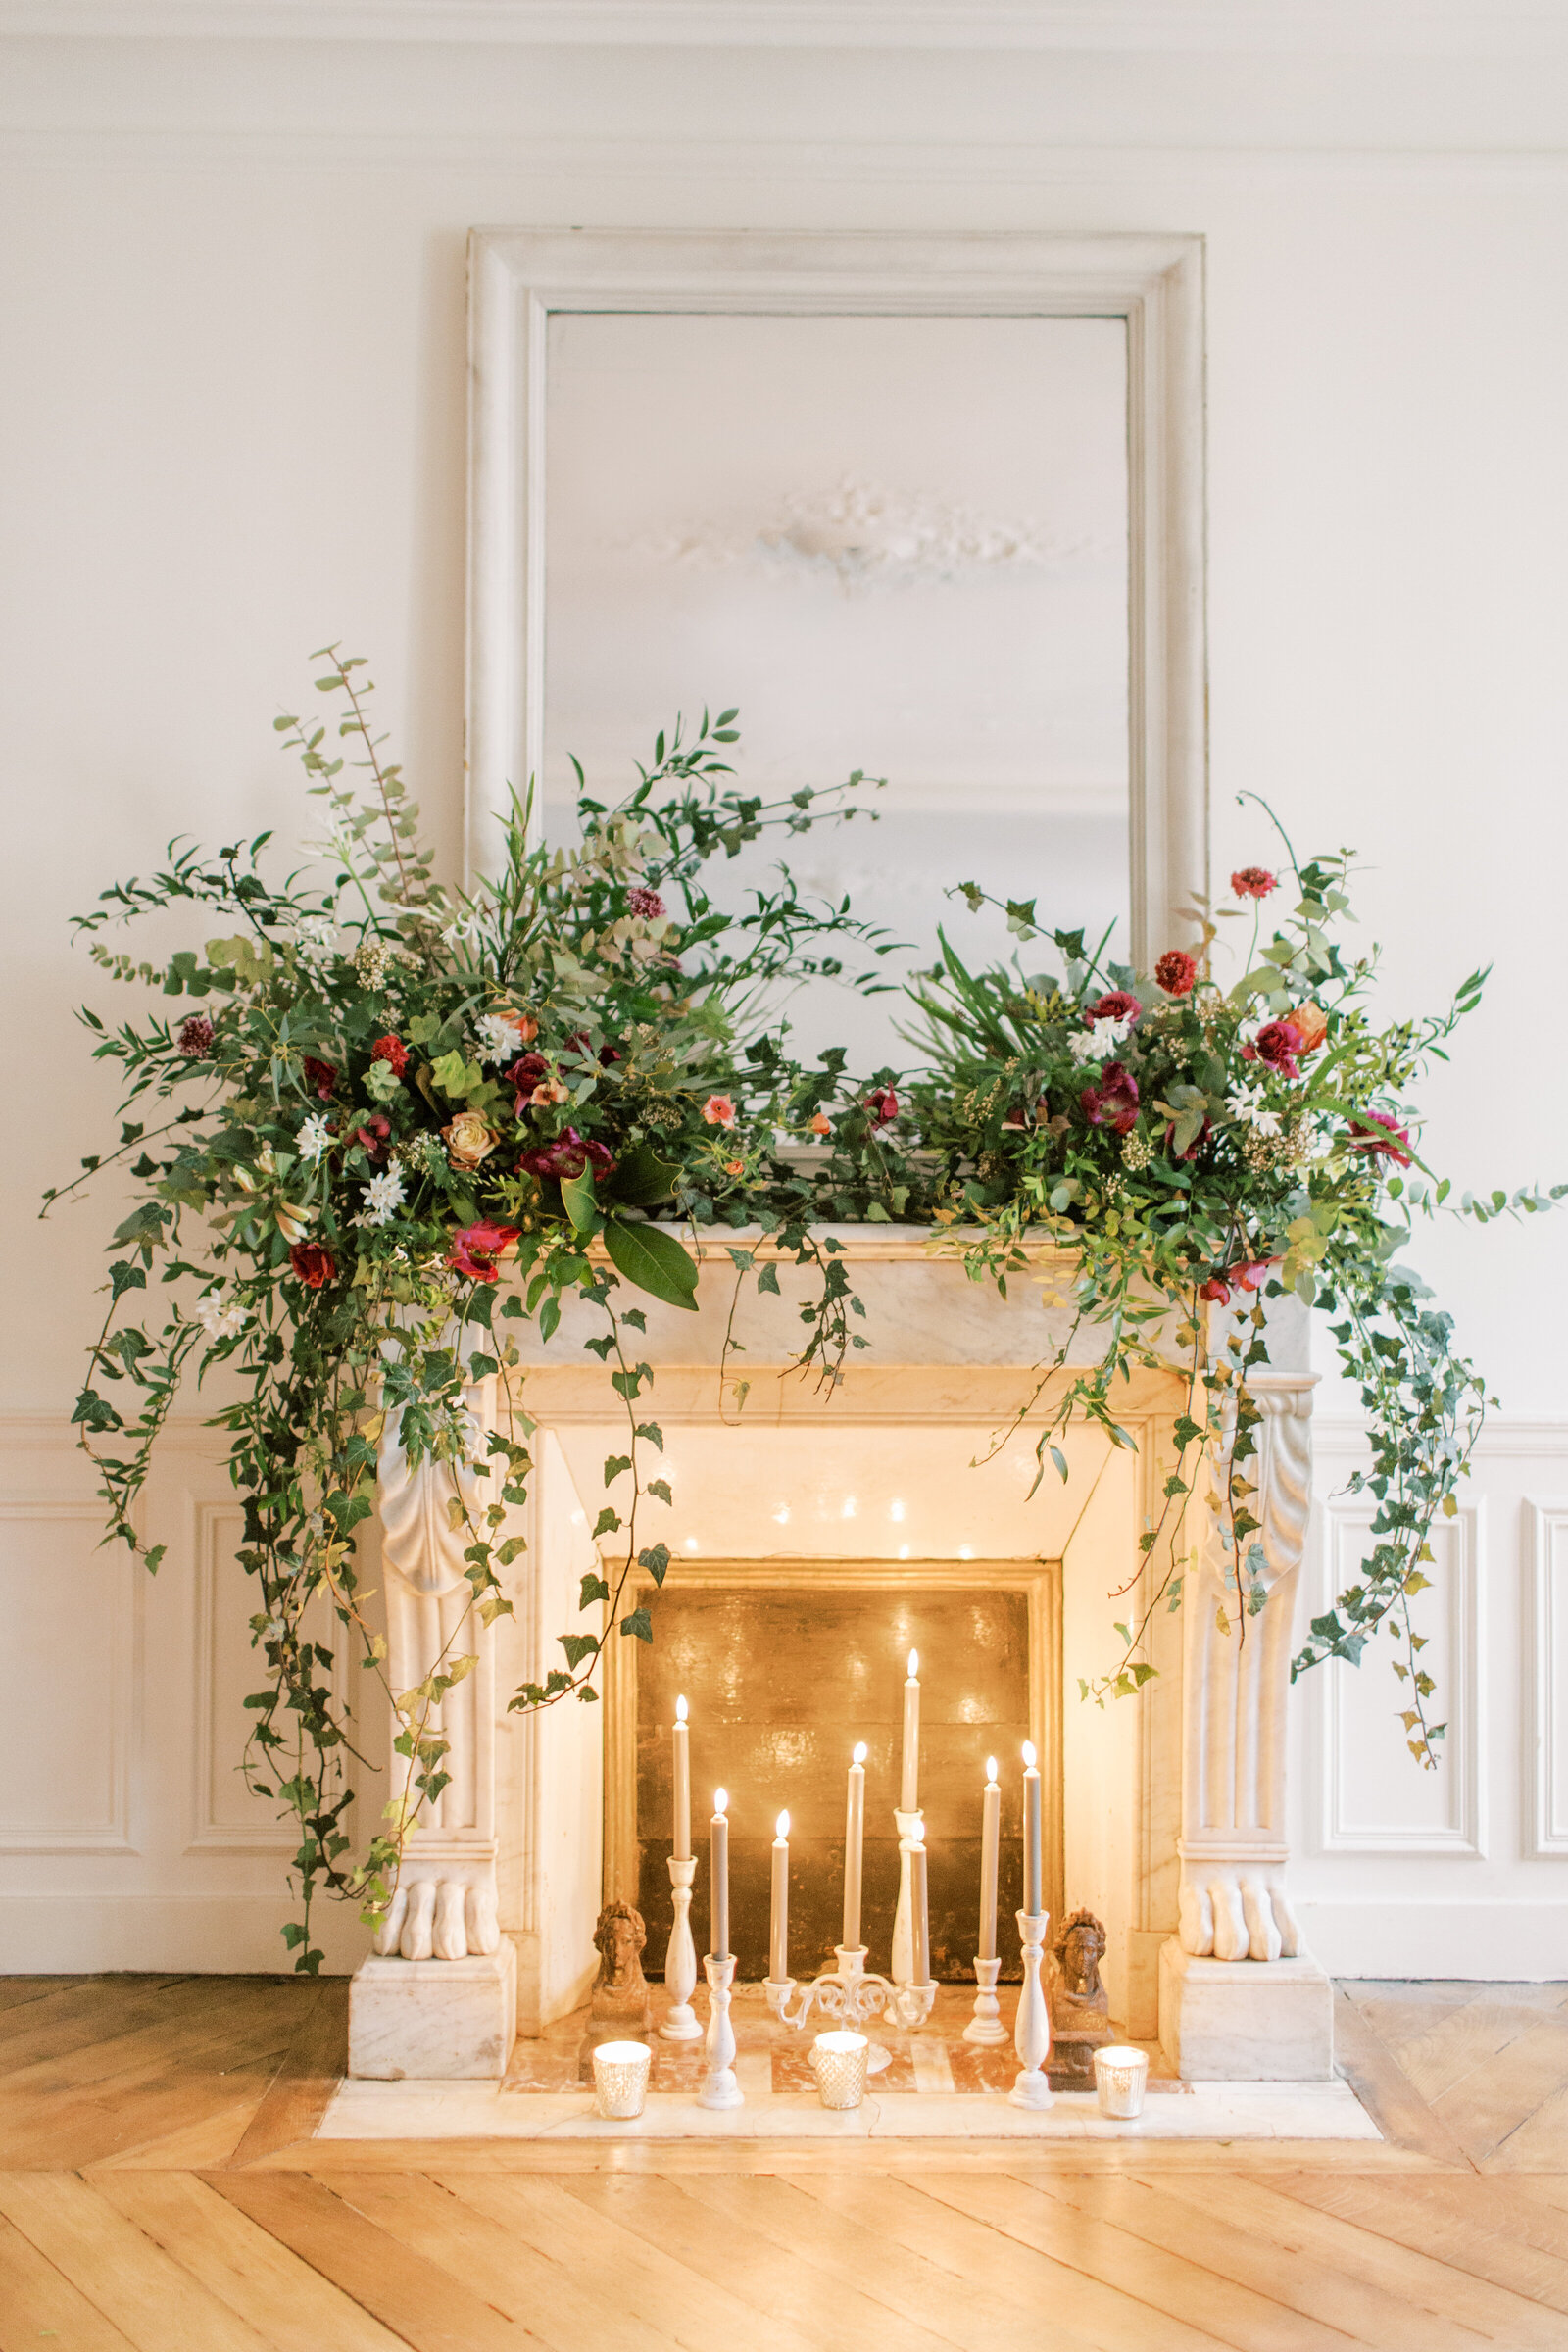 fireplace mantel with candles and flowers